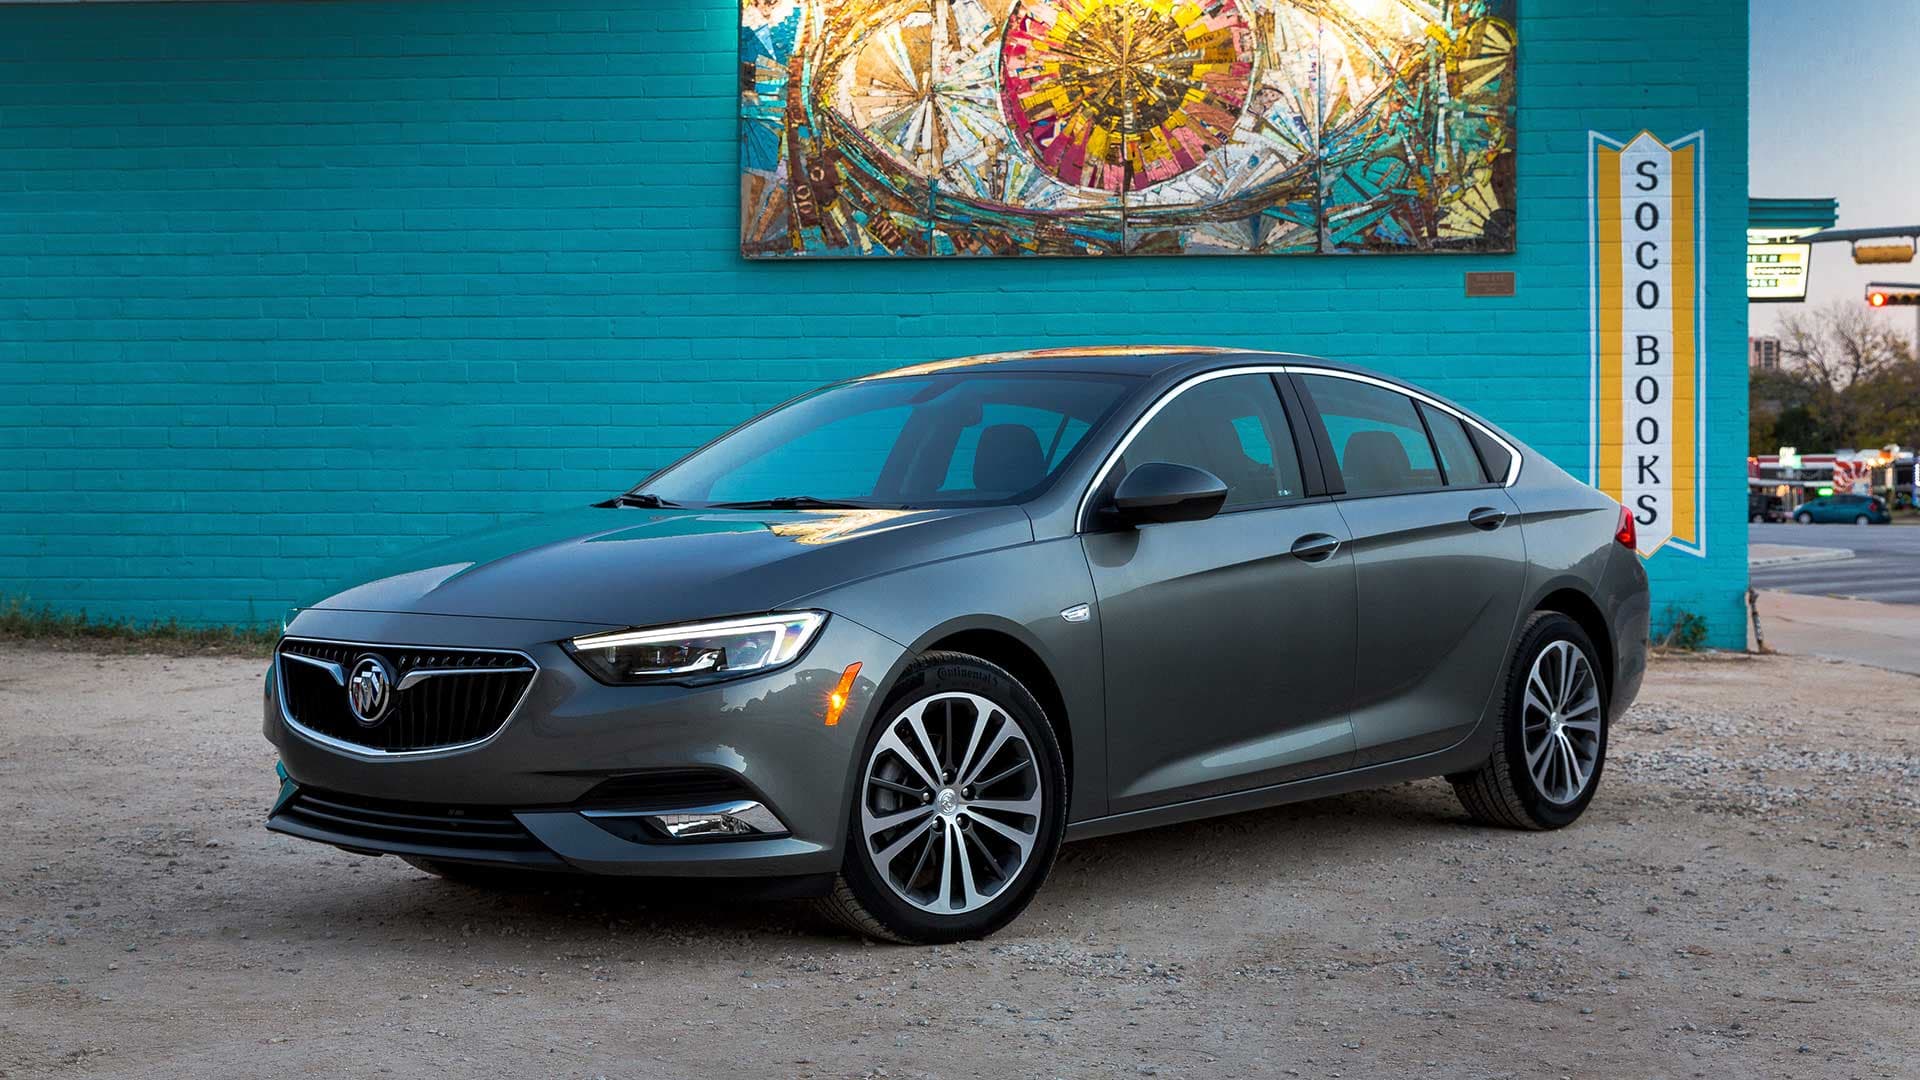 The 2018 Buick Regal Is a Decent Car, If Not Quite Fit For a King